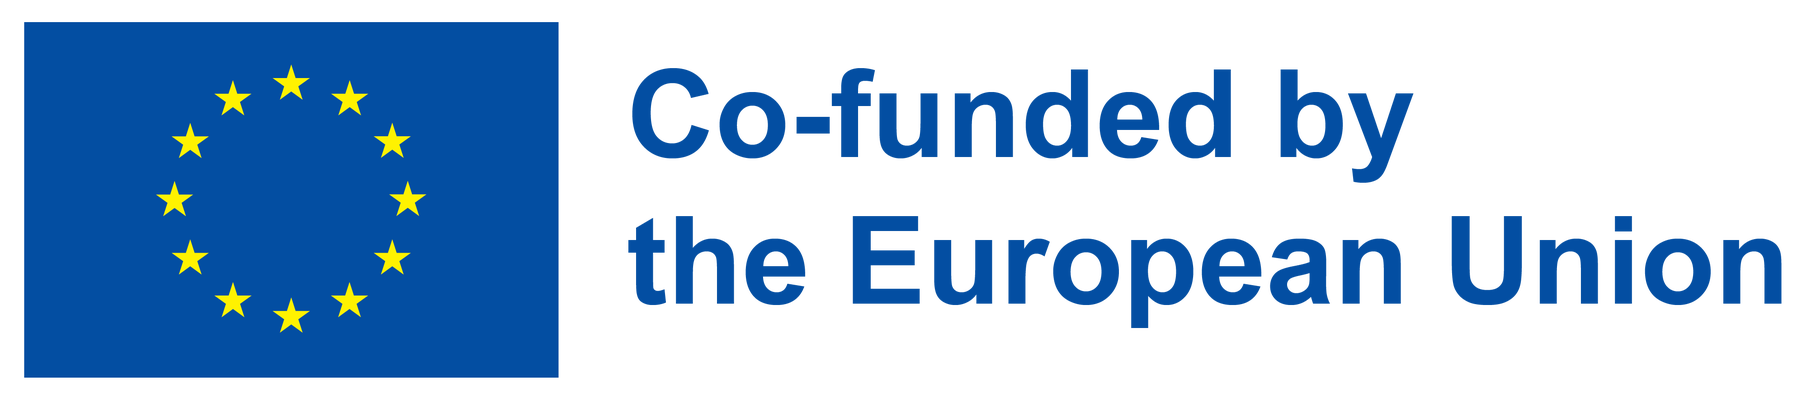 European Union flag on the left. "Co-funded by the European Union" text on the right.